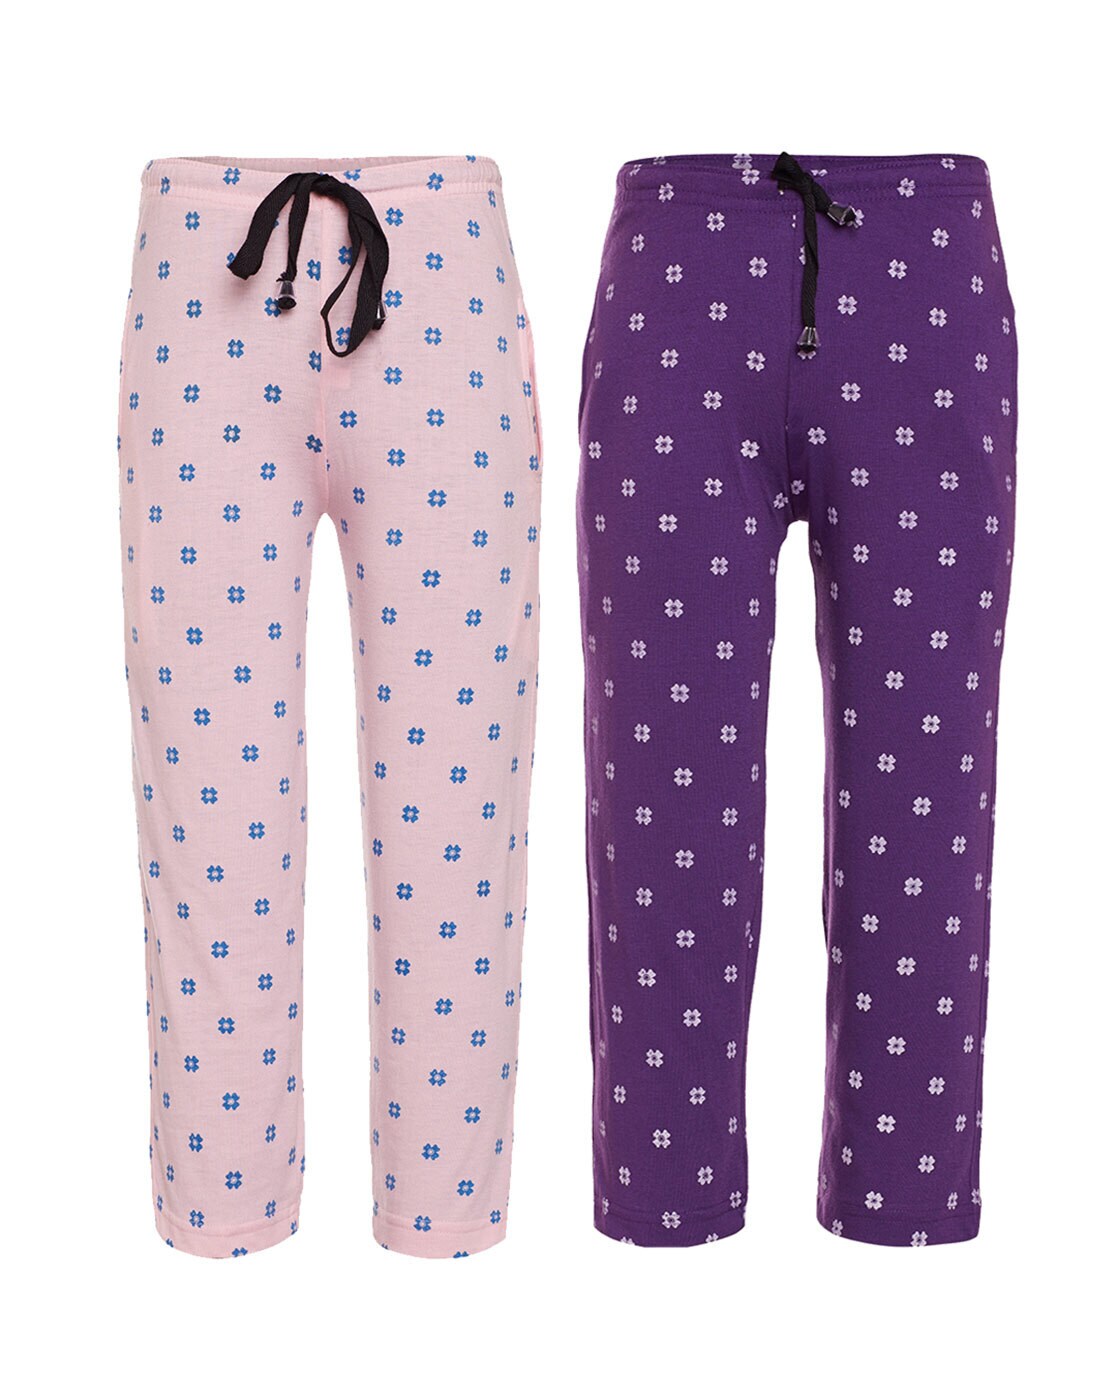 Buy Night Pants for Women Online in India at Low Price | AJIO